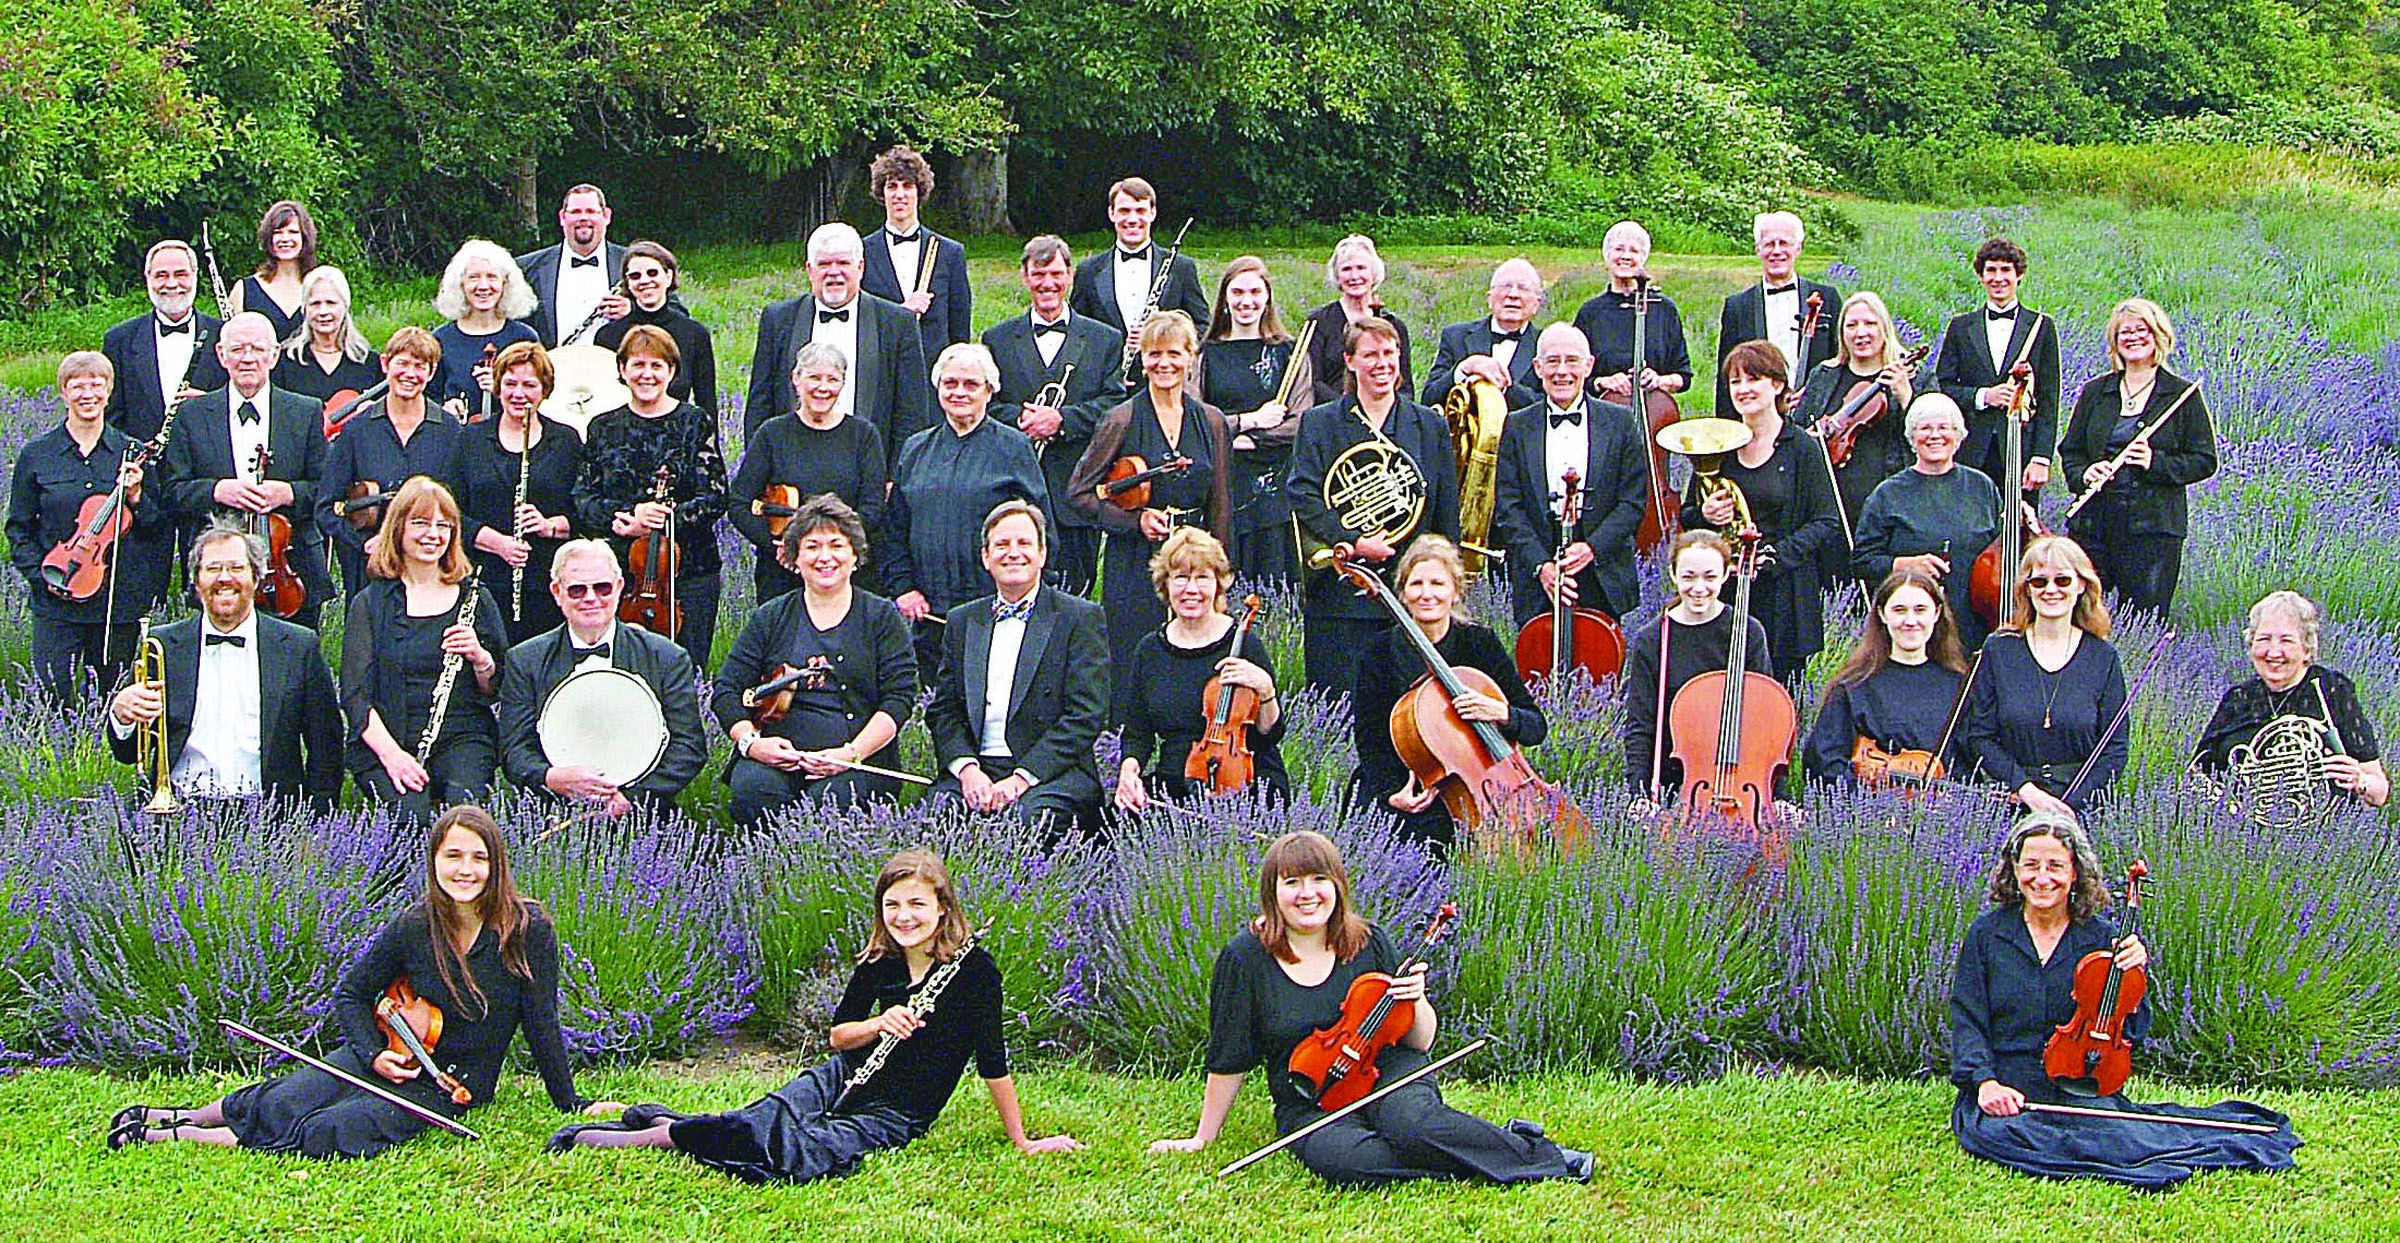 The Port Angeles Symphony Orchestra